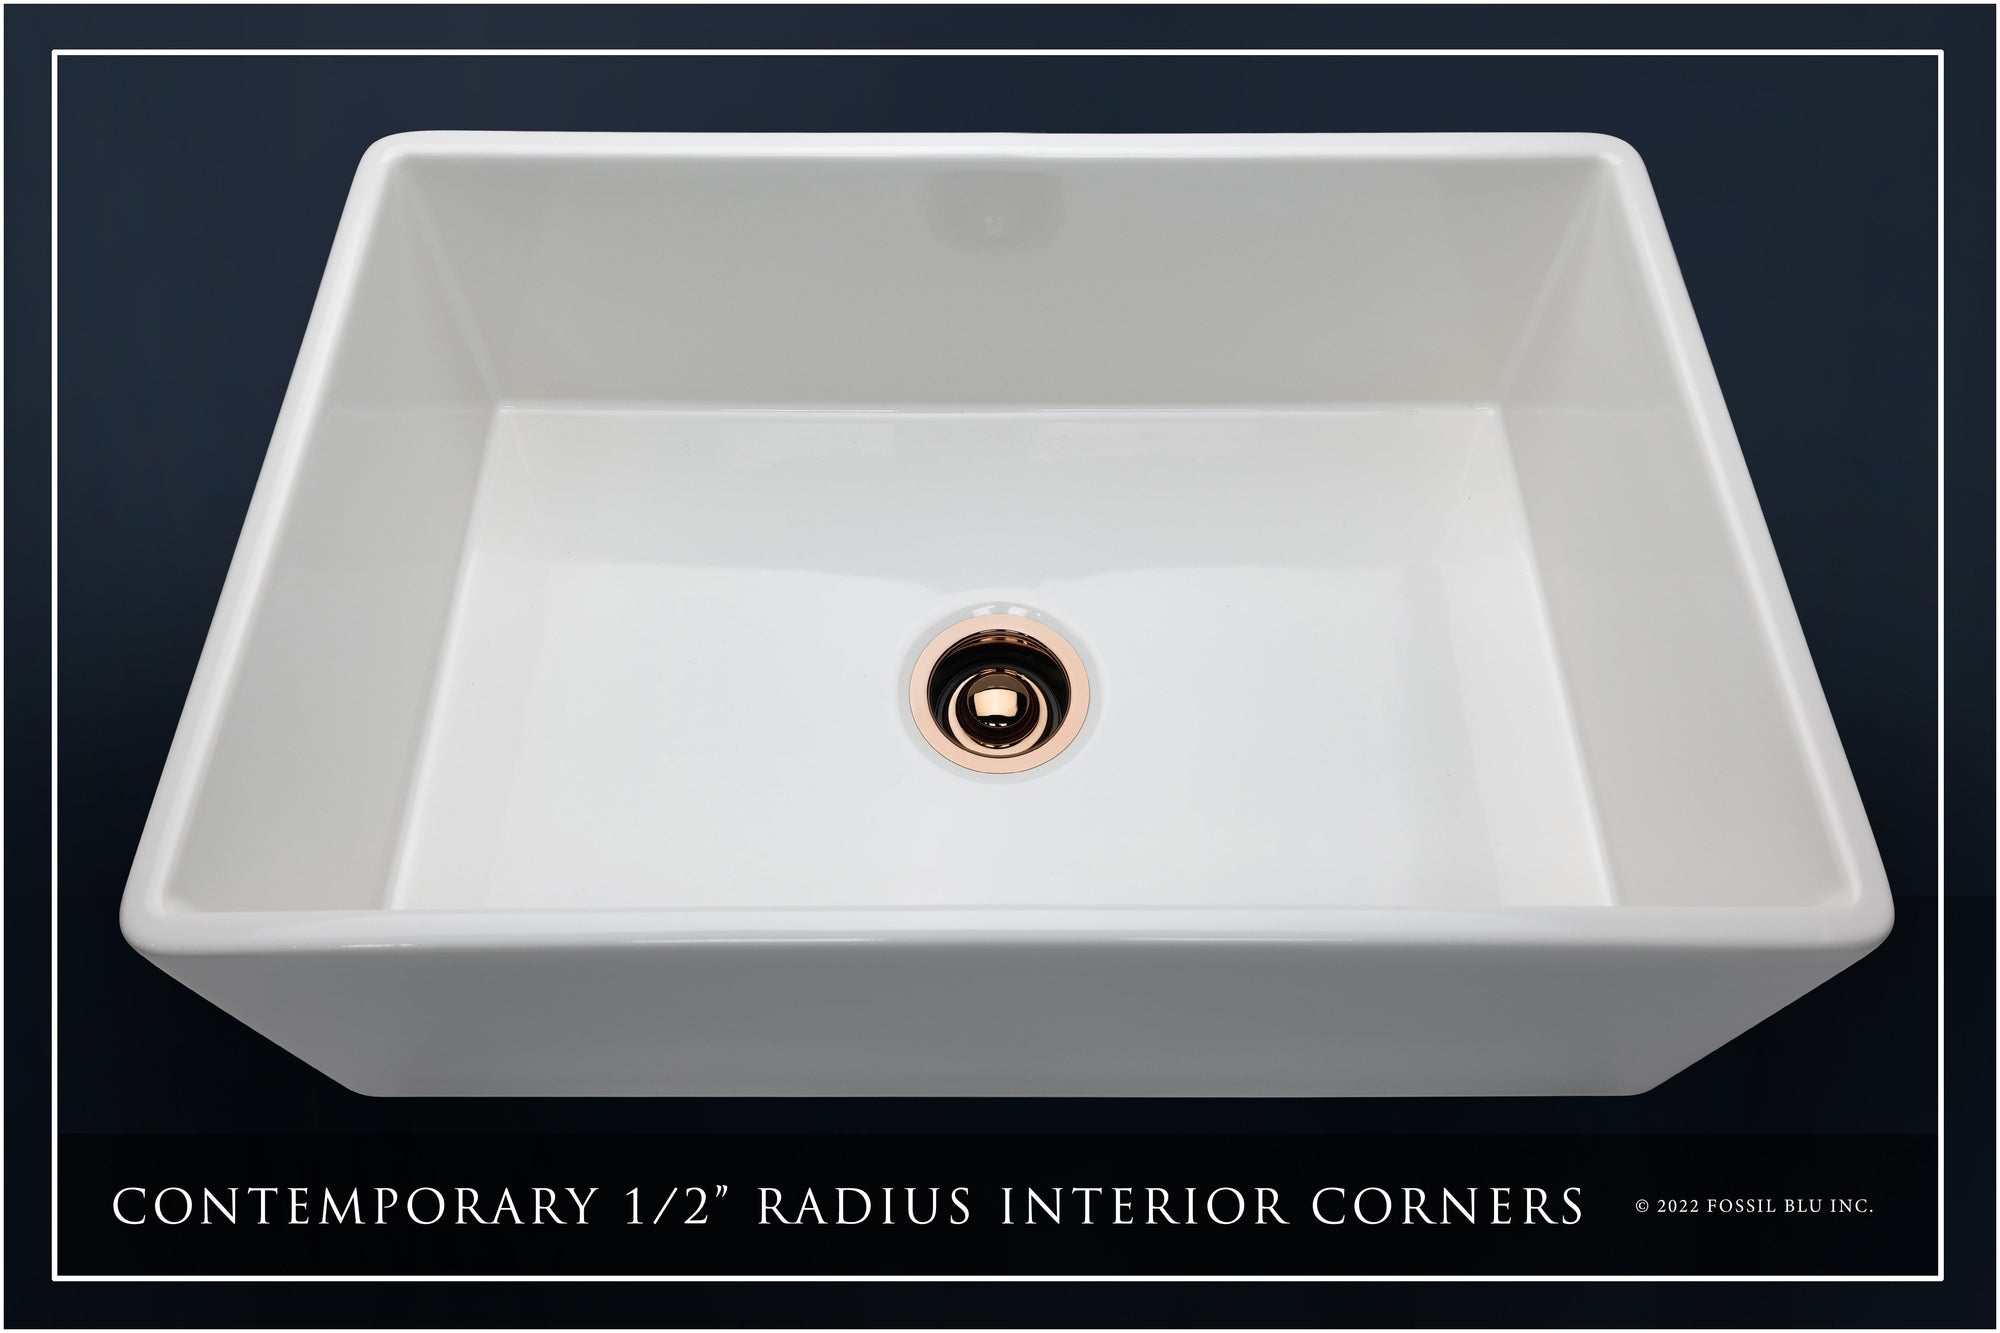 FSW1001RG LUXURY 30-INCH SOLID FIRECLAY FARMHOUSE SINK IN WHITE, POL. ROSE GOLD ACCS, FLAT FRONT